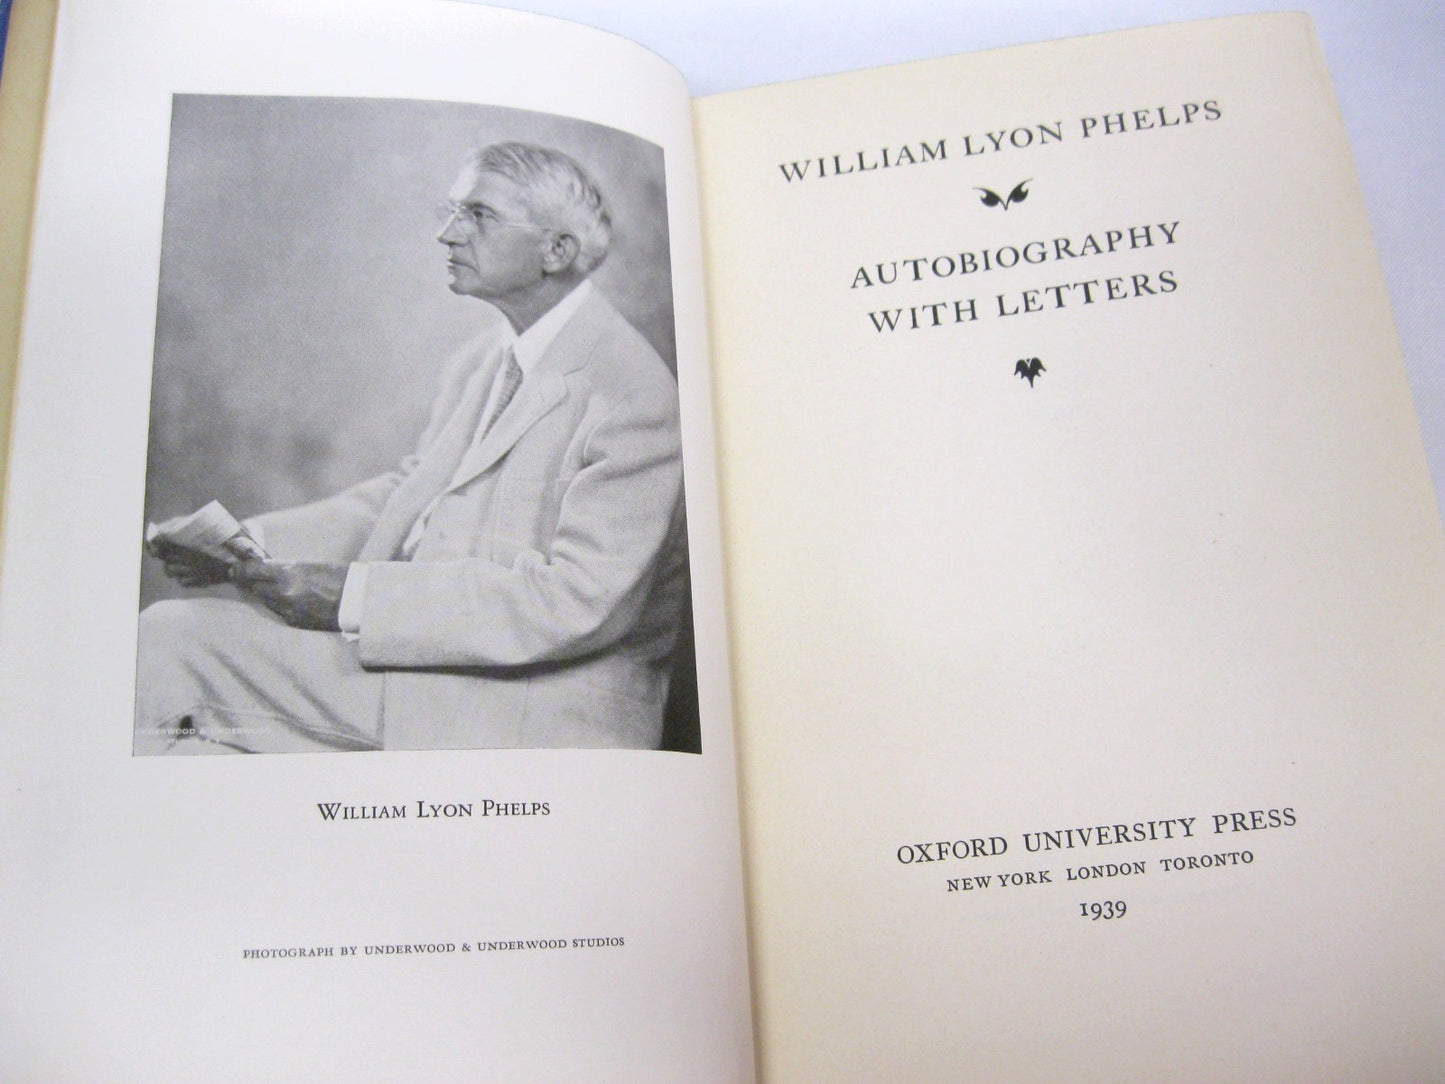 Autobiography with Letters by William Lyon Phelps